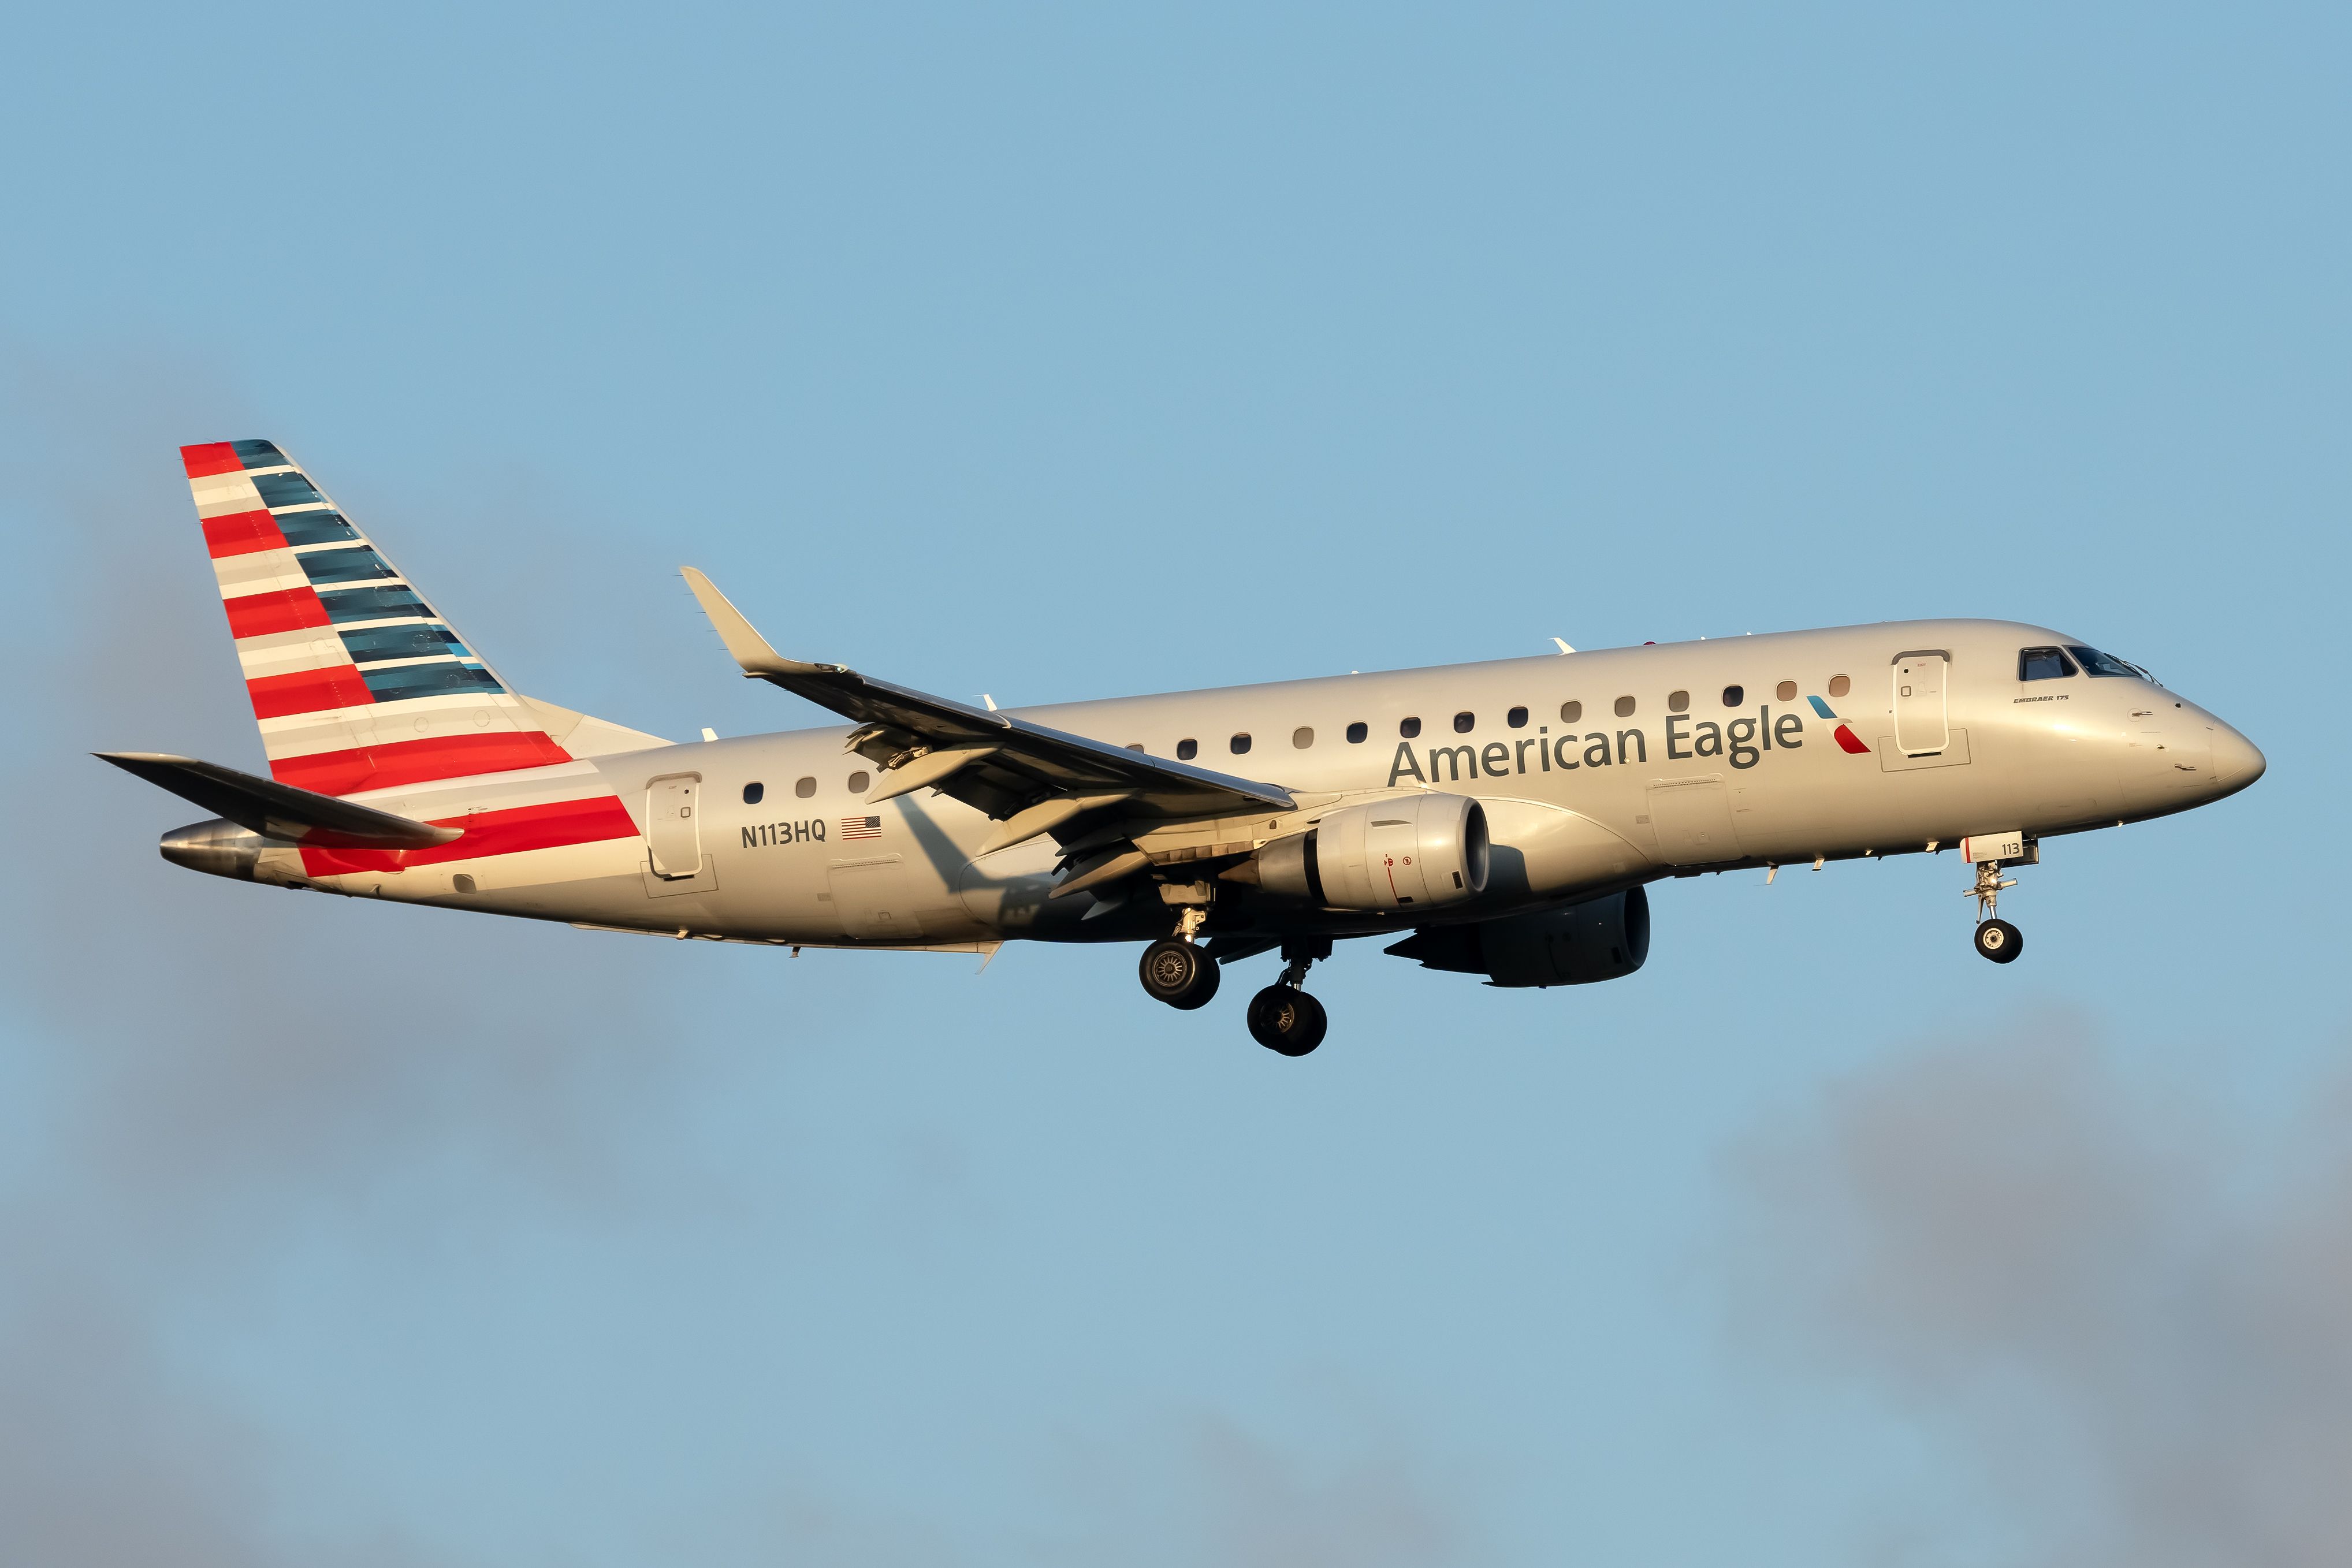 An American Airlines Embraer E175 aircraft. 